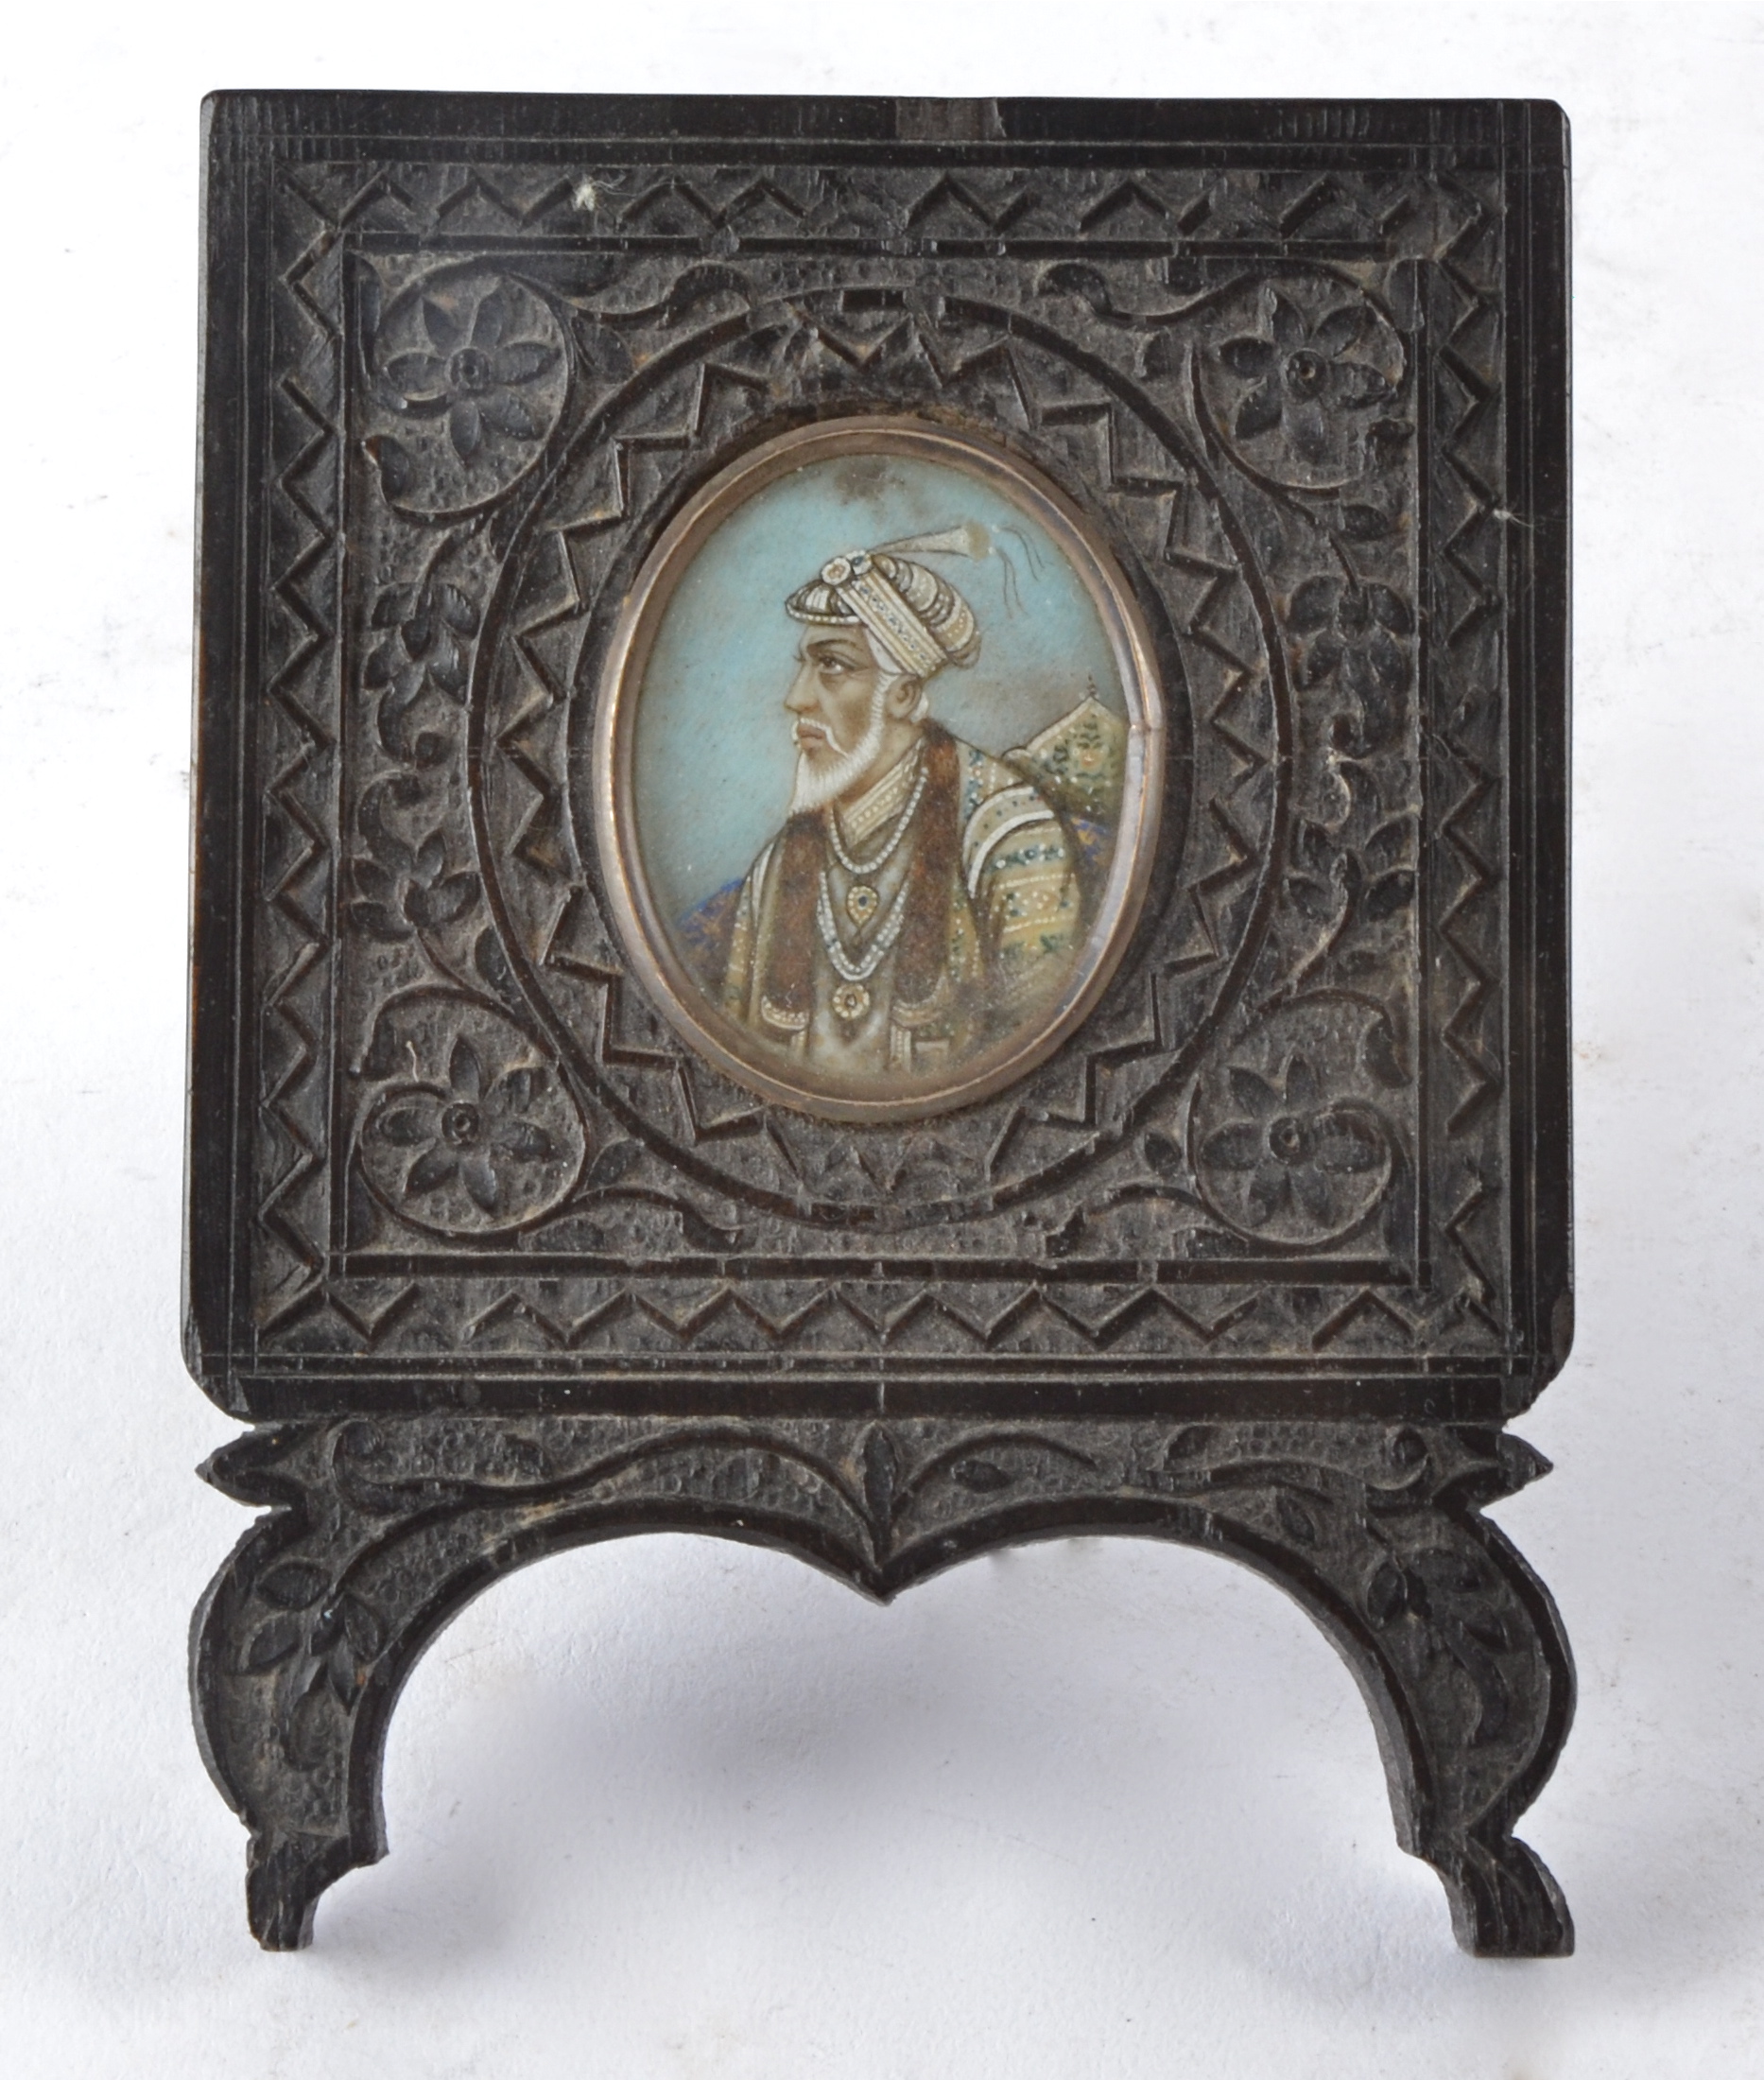 An oval Indian miniature portrait painting, encased in a profusely carved ebonised surround, 11cm - Image 2 of 3